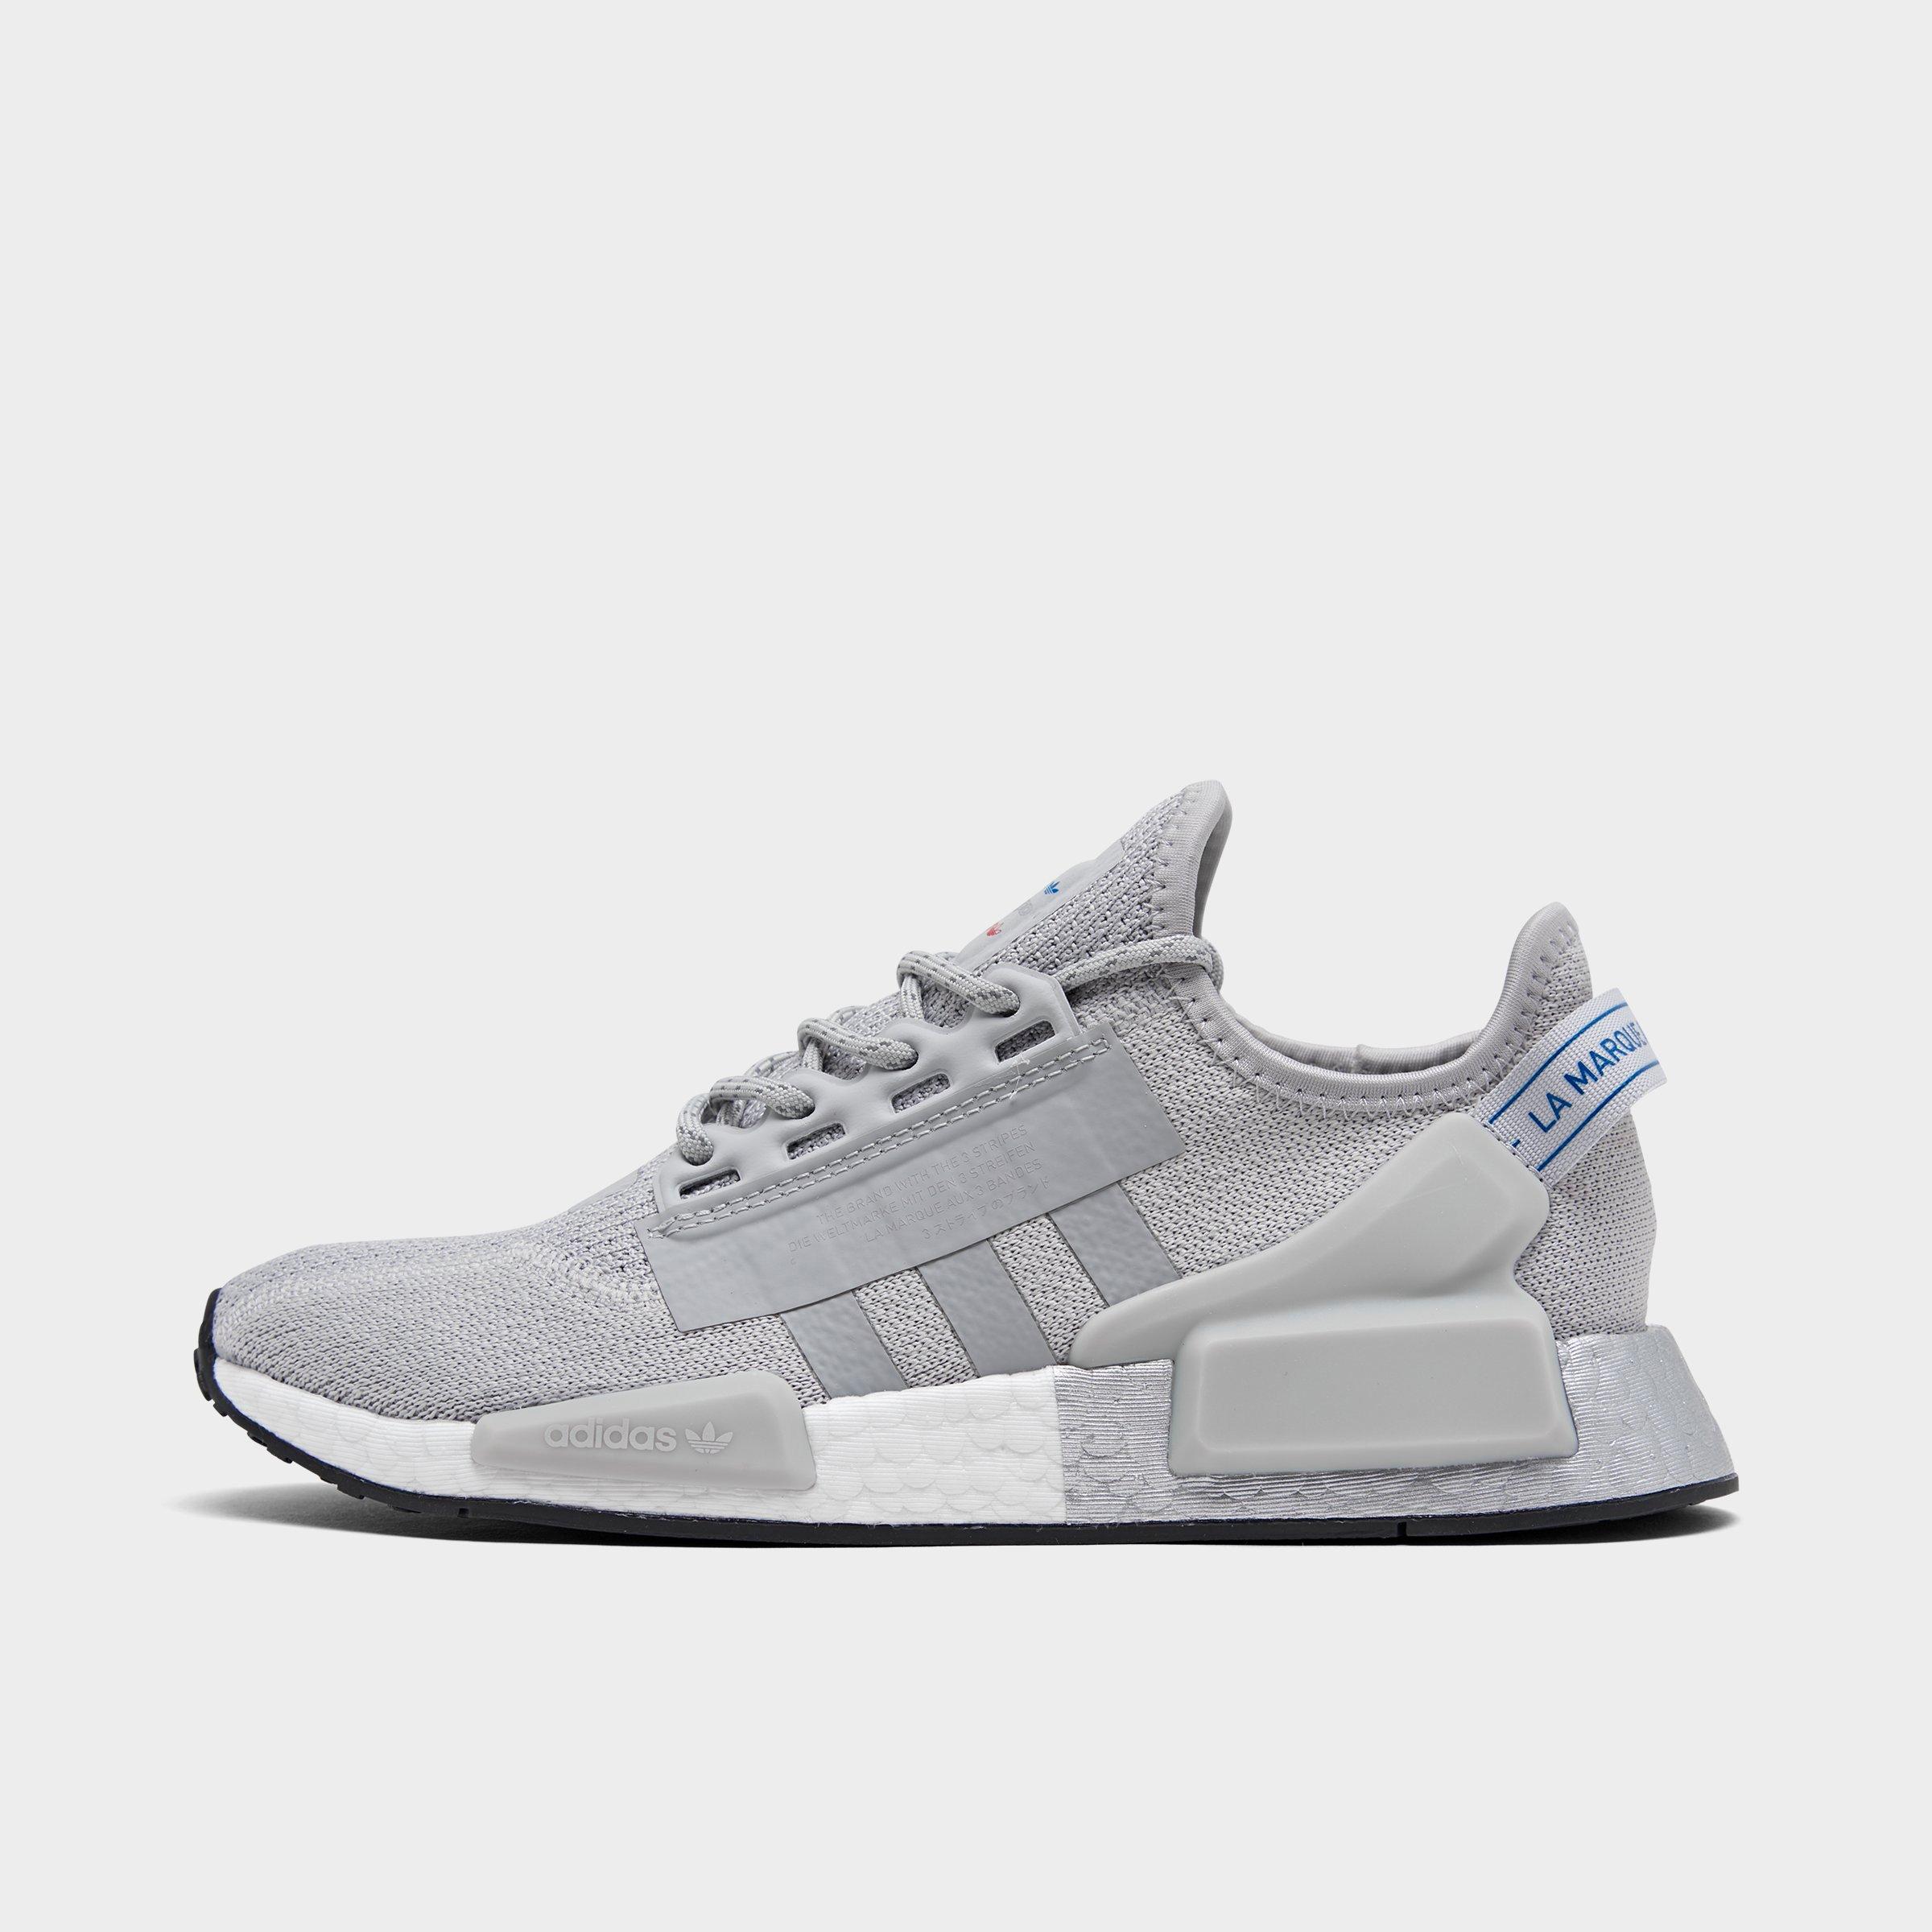 nmd r1 youth